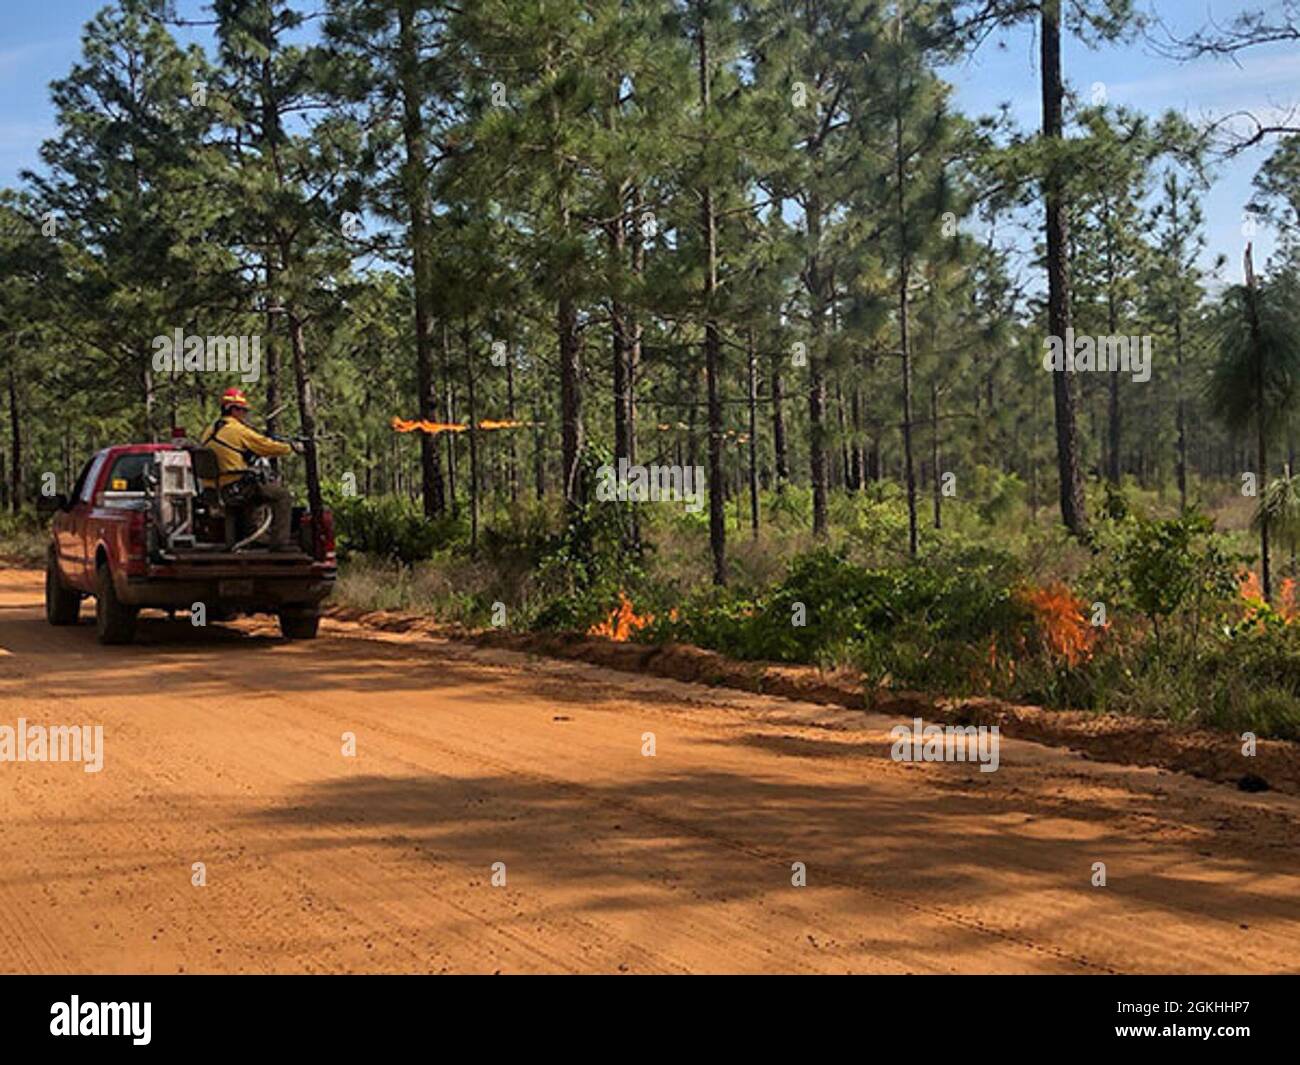 An equipment operator with the Fort Stewart-Hunter Army Airfield Forestry Branch ignites a baseline fire upwind along a dirt road in the installation's training area, April 23 on Fort Stewart. Stock Photo